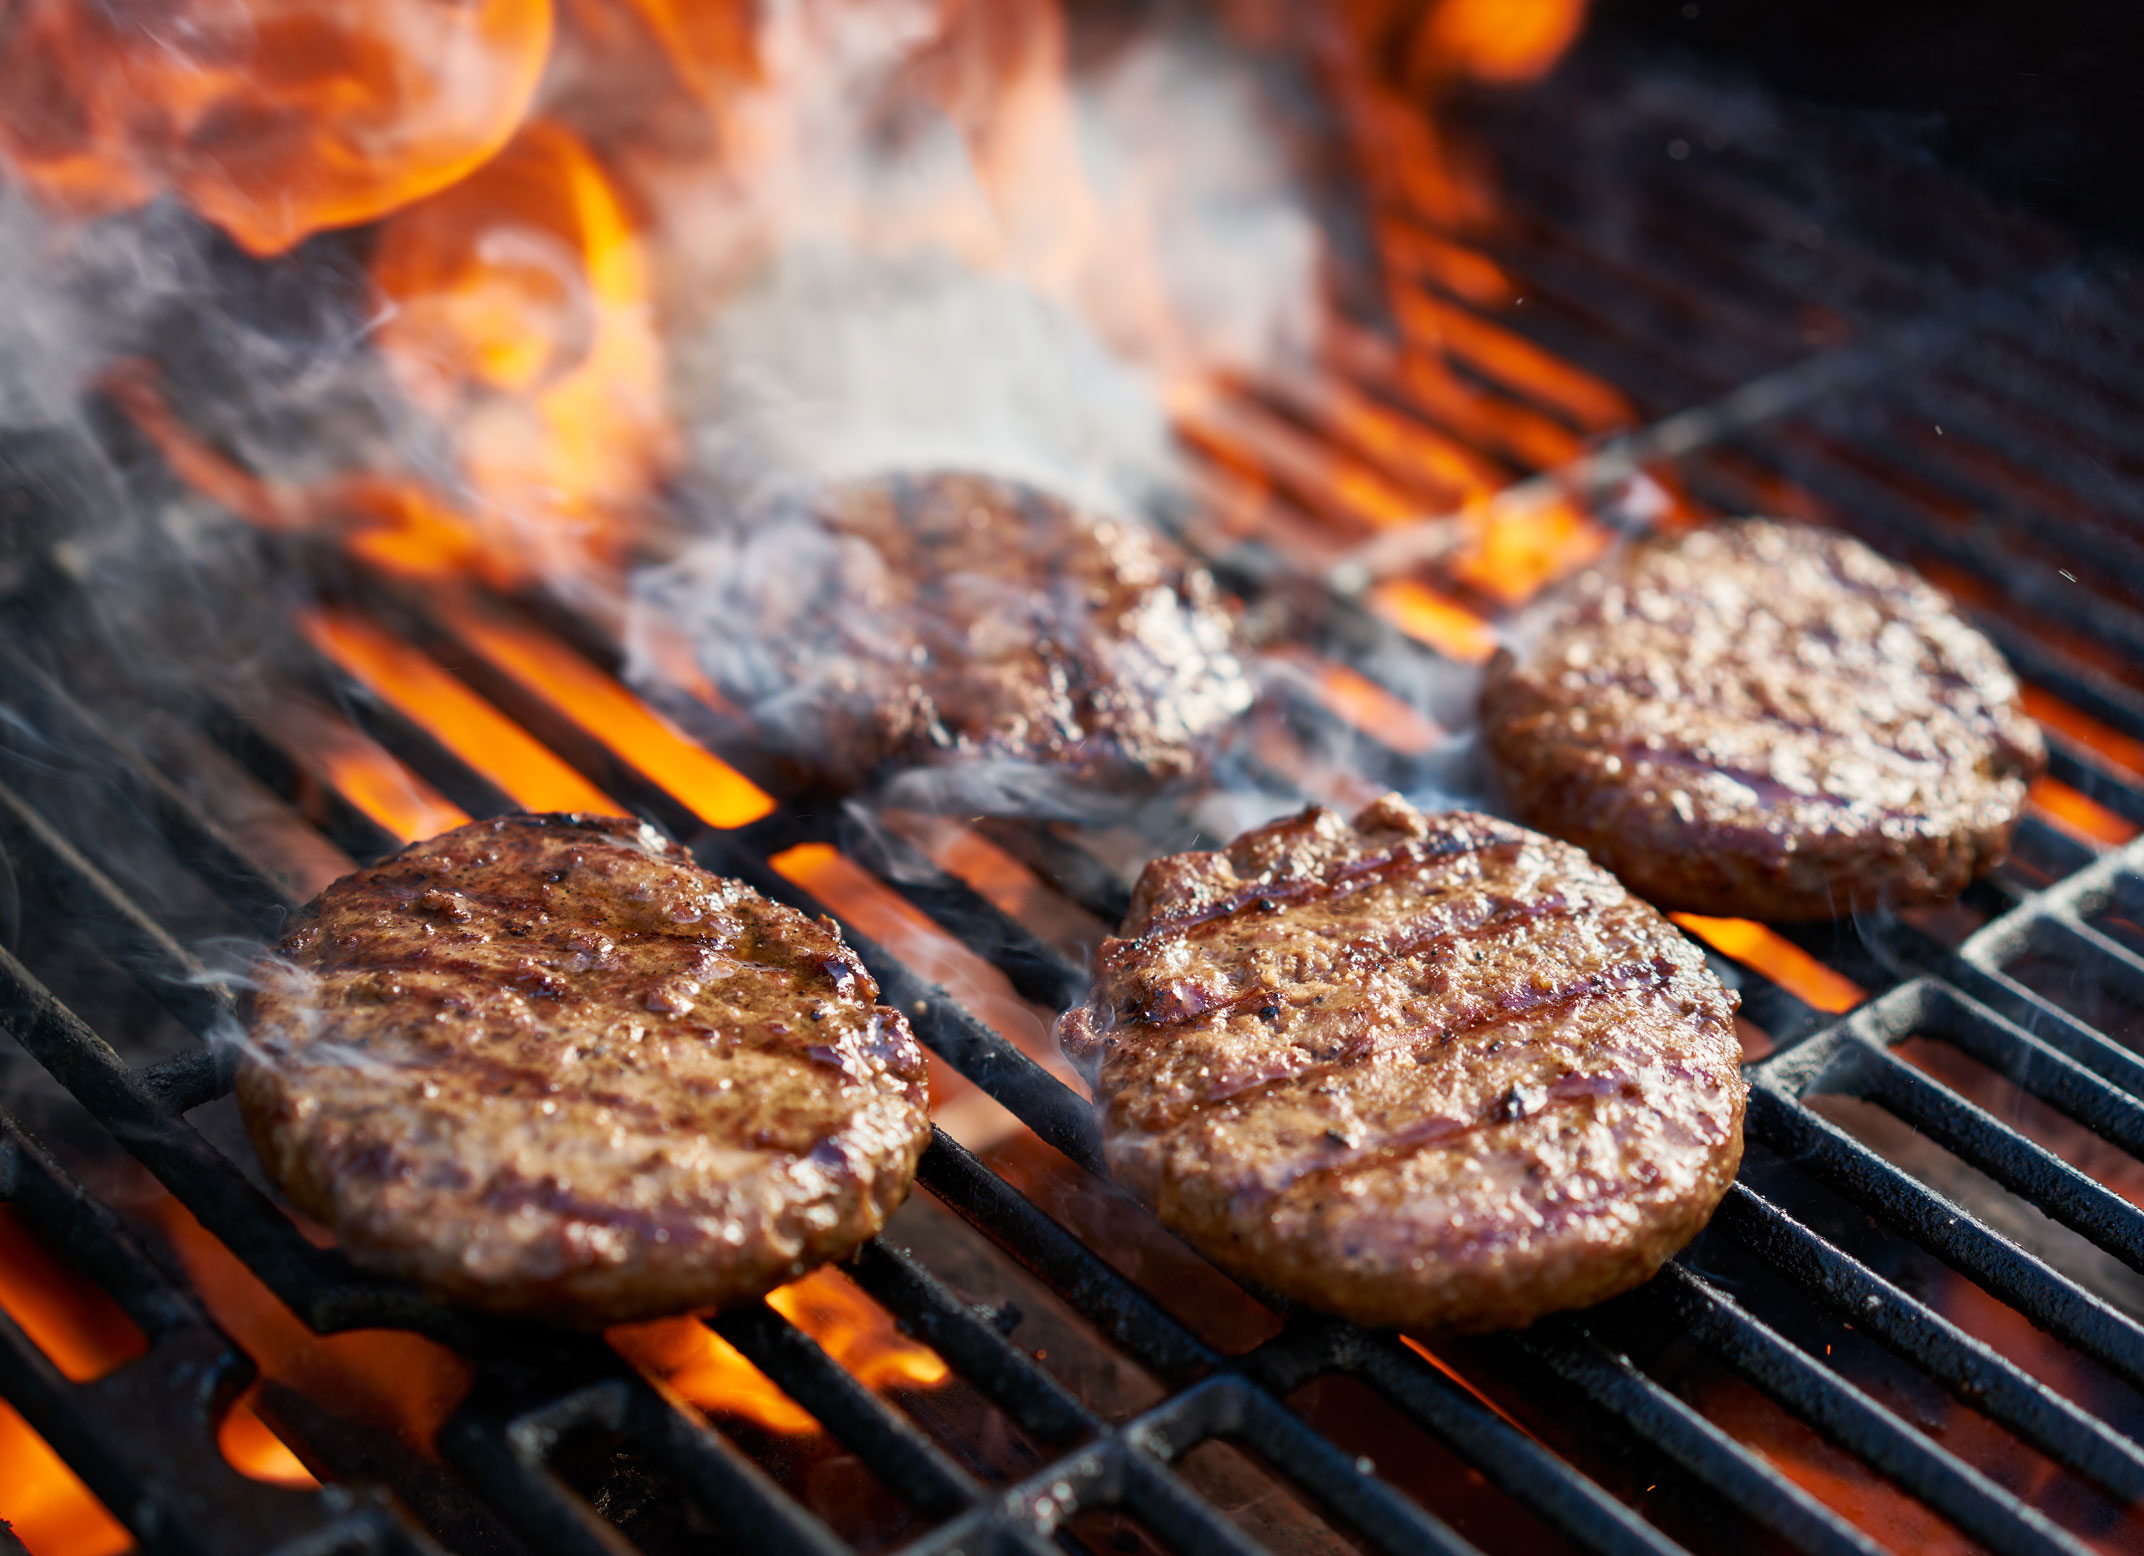 Burger patties cooking on a grill